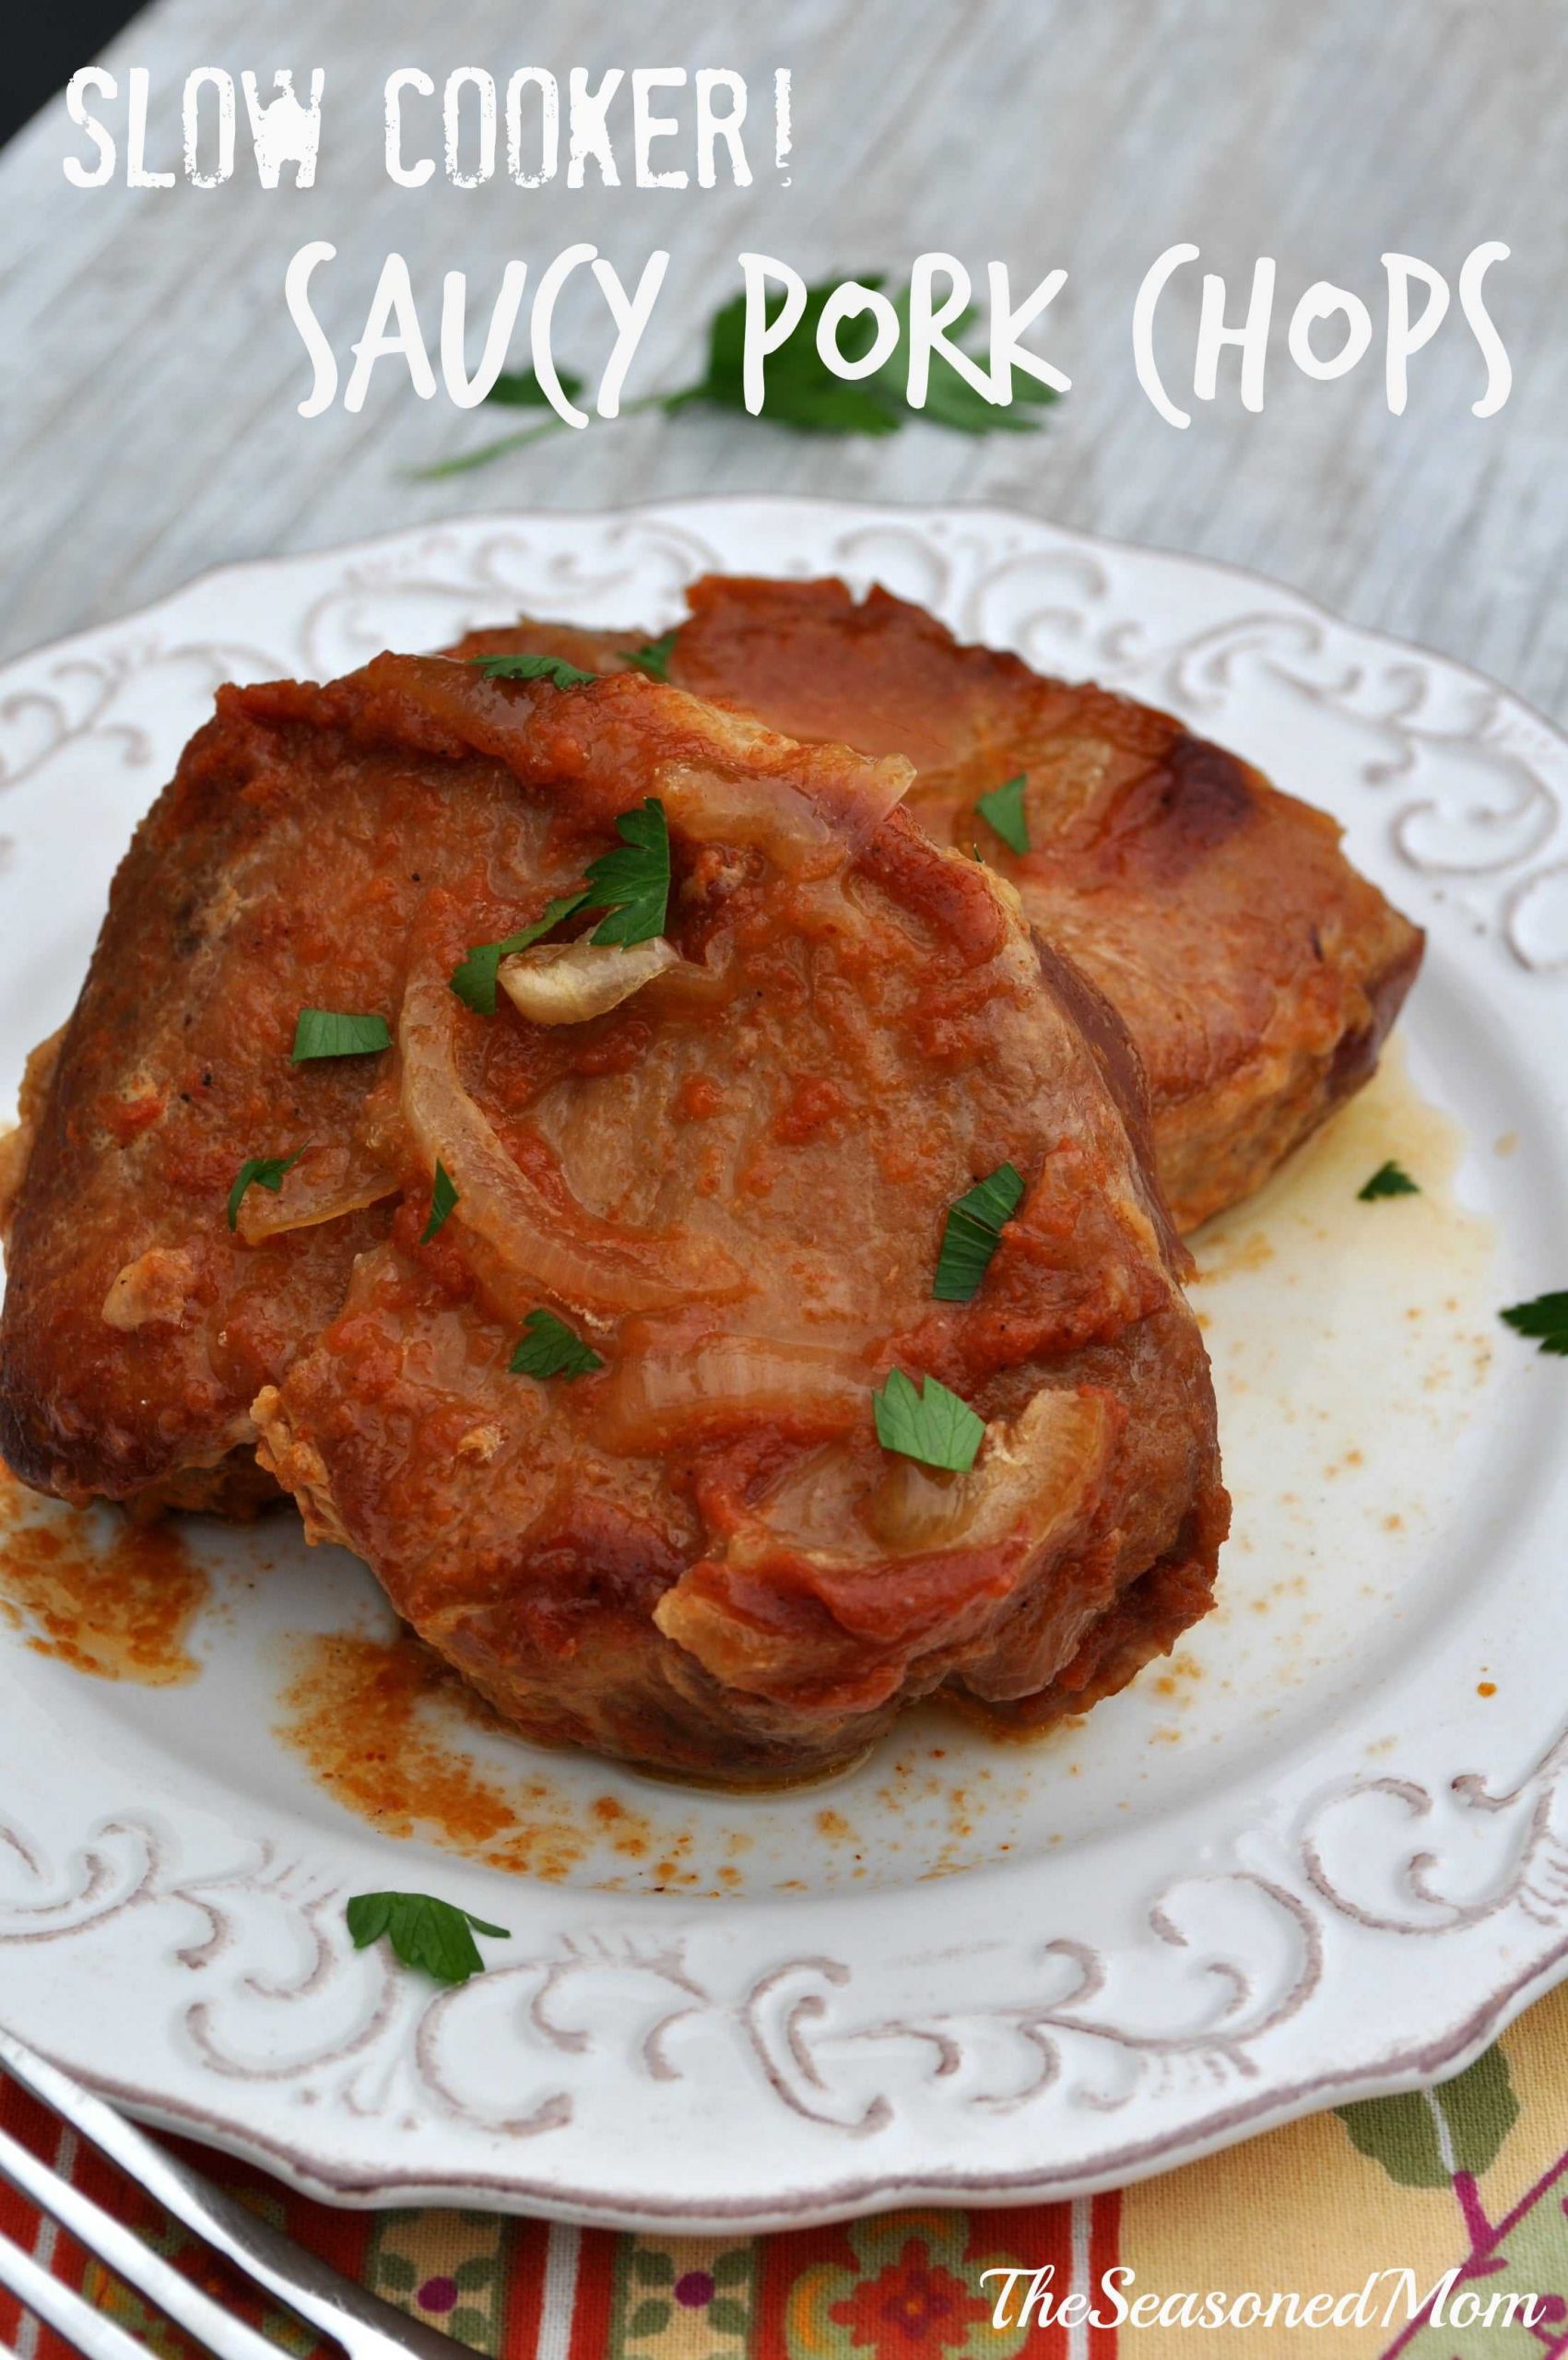 Slow Cooked Pork Chops
 Slow Cooker Saucy Pork Chops The Seasoned Mom